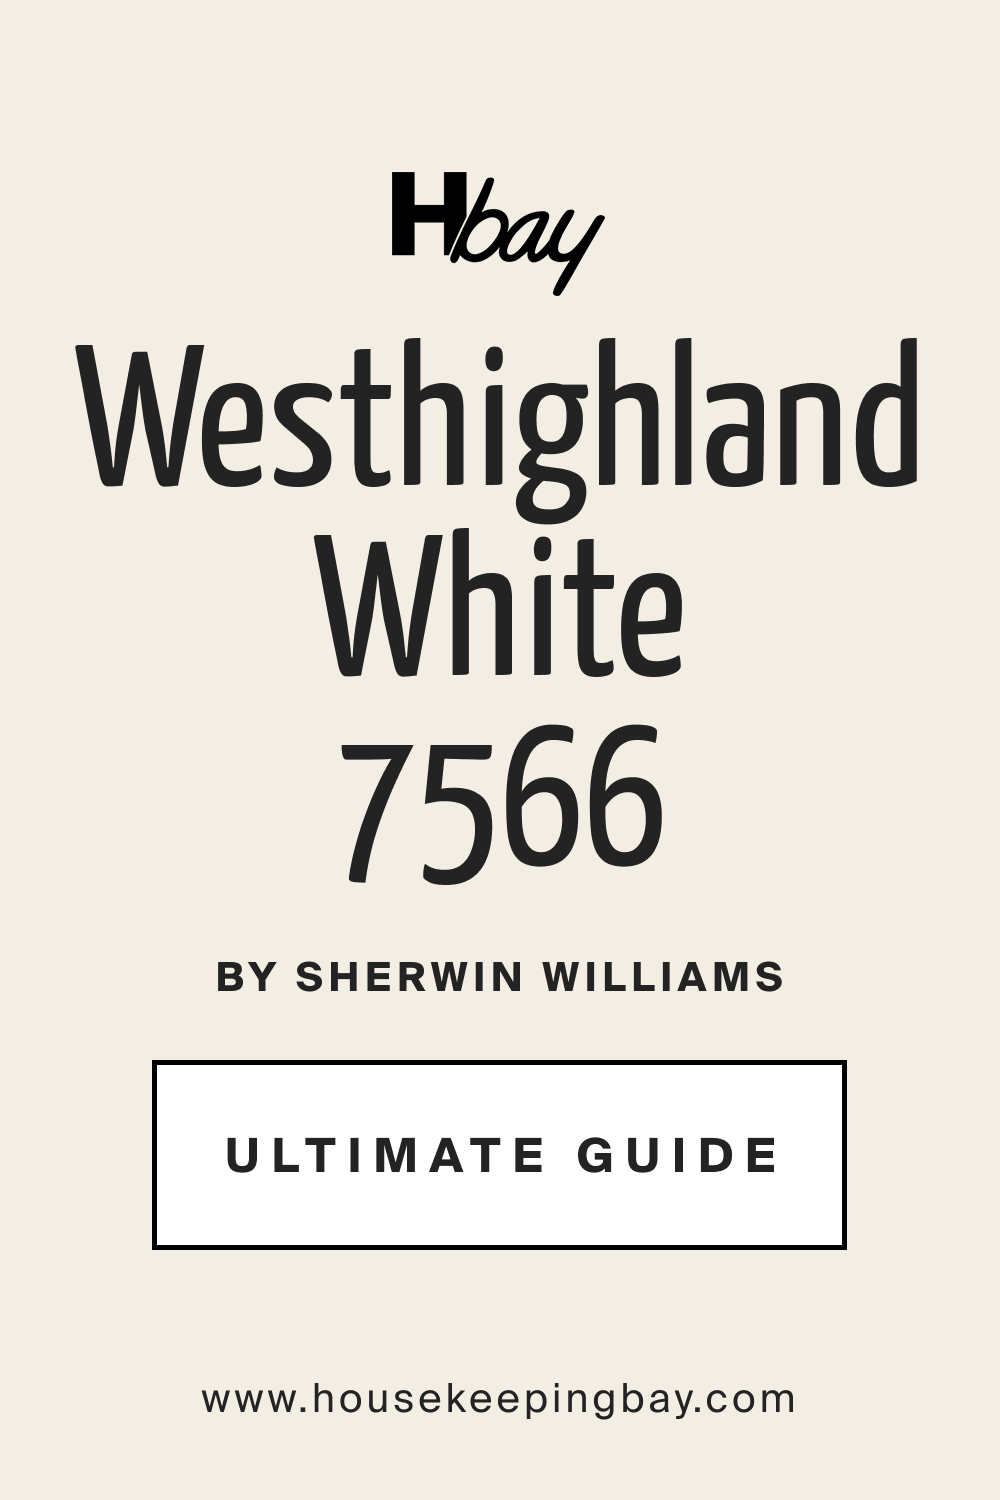 Westhighland White SW 7566 by Sherwin Williams Ultimate Guide